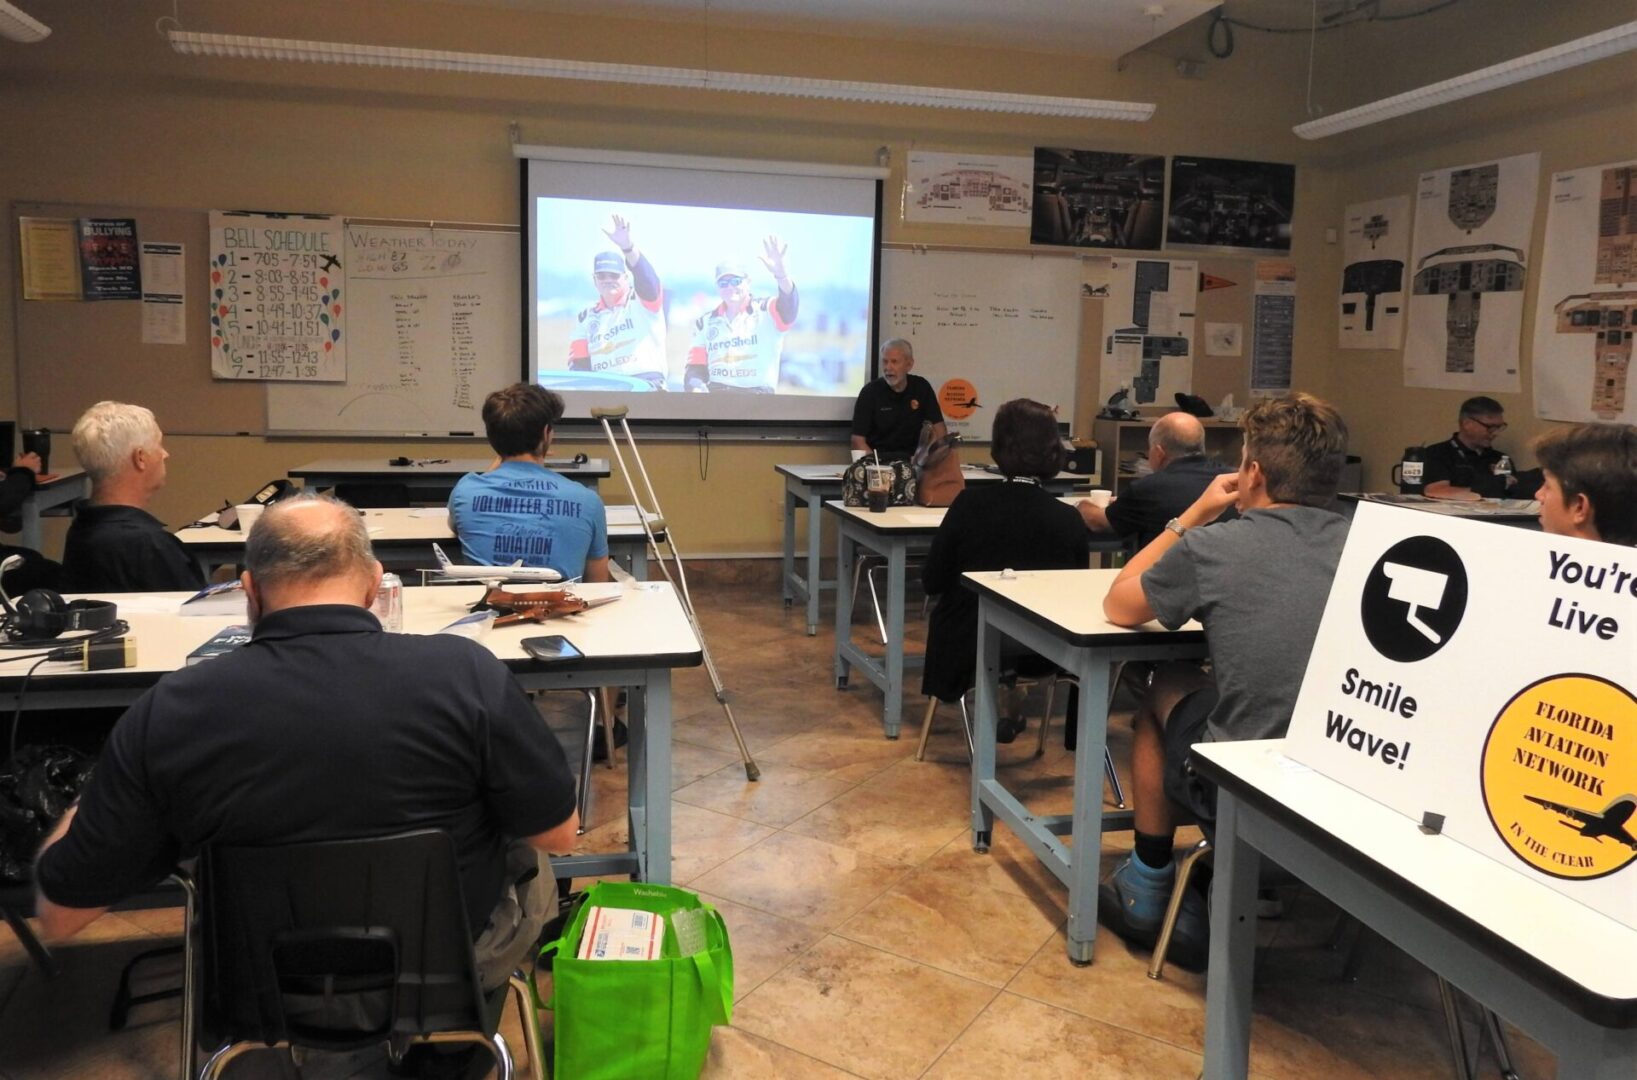 A group of people sitting at tables in front of a projector screen.